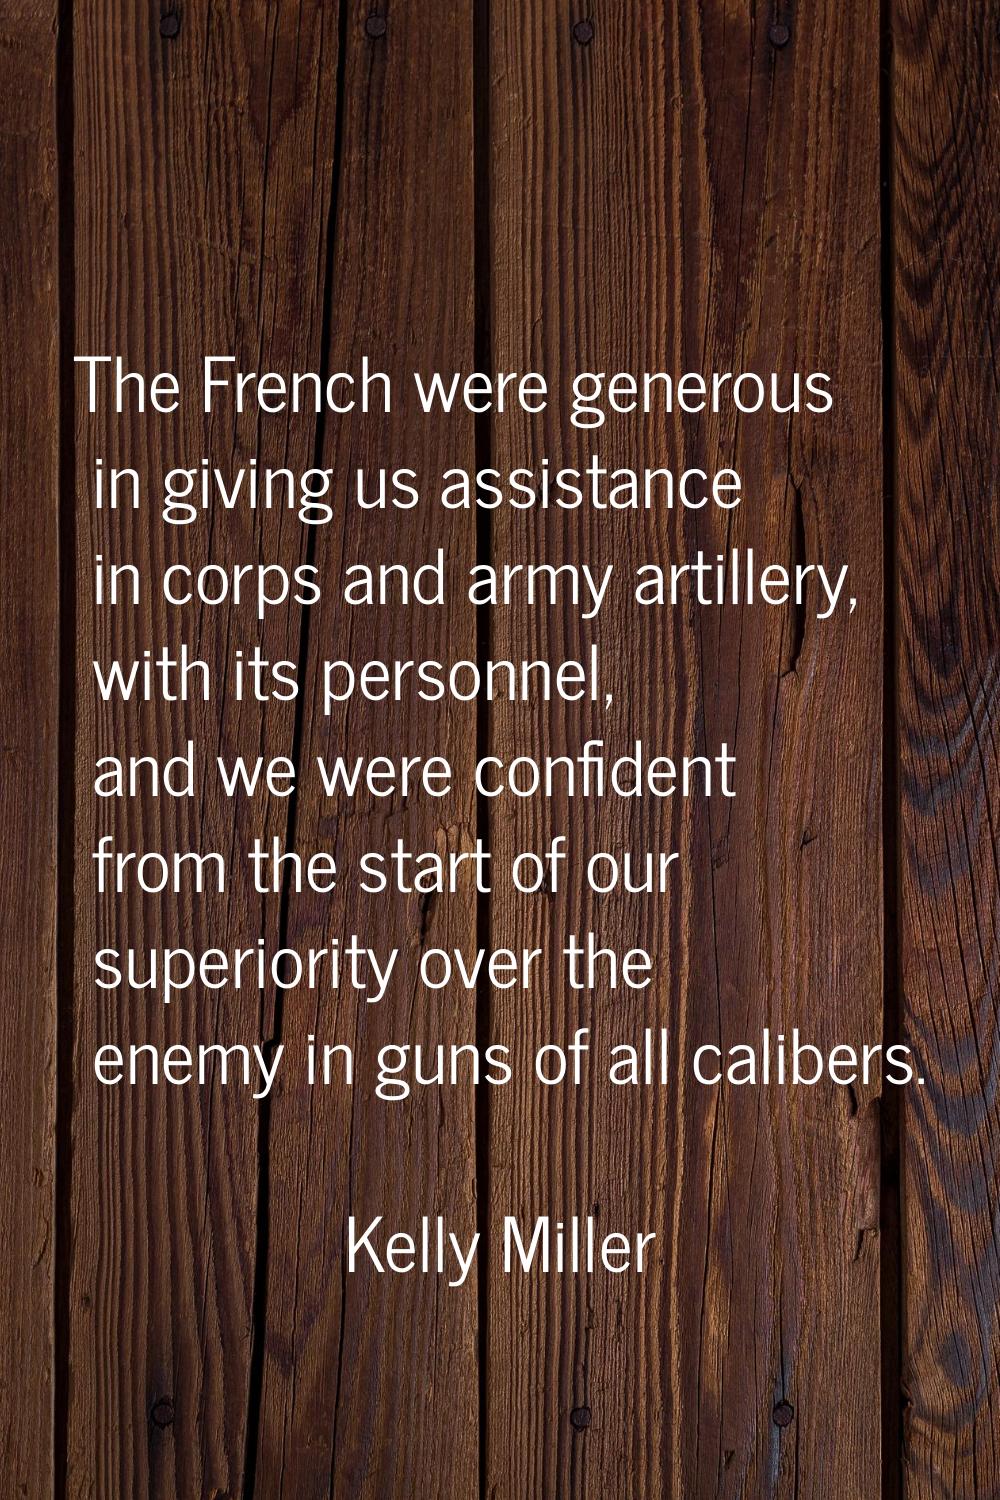 The French were generous in giving us assistance in corps and army artillery, with its personnel, a